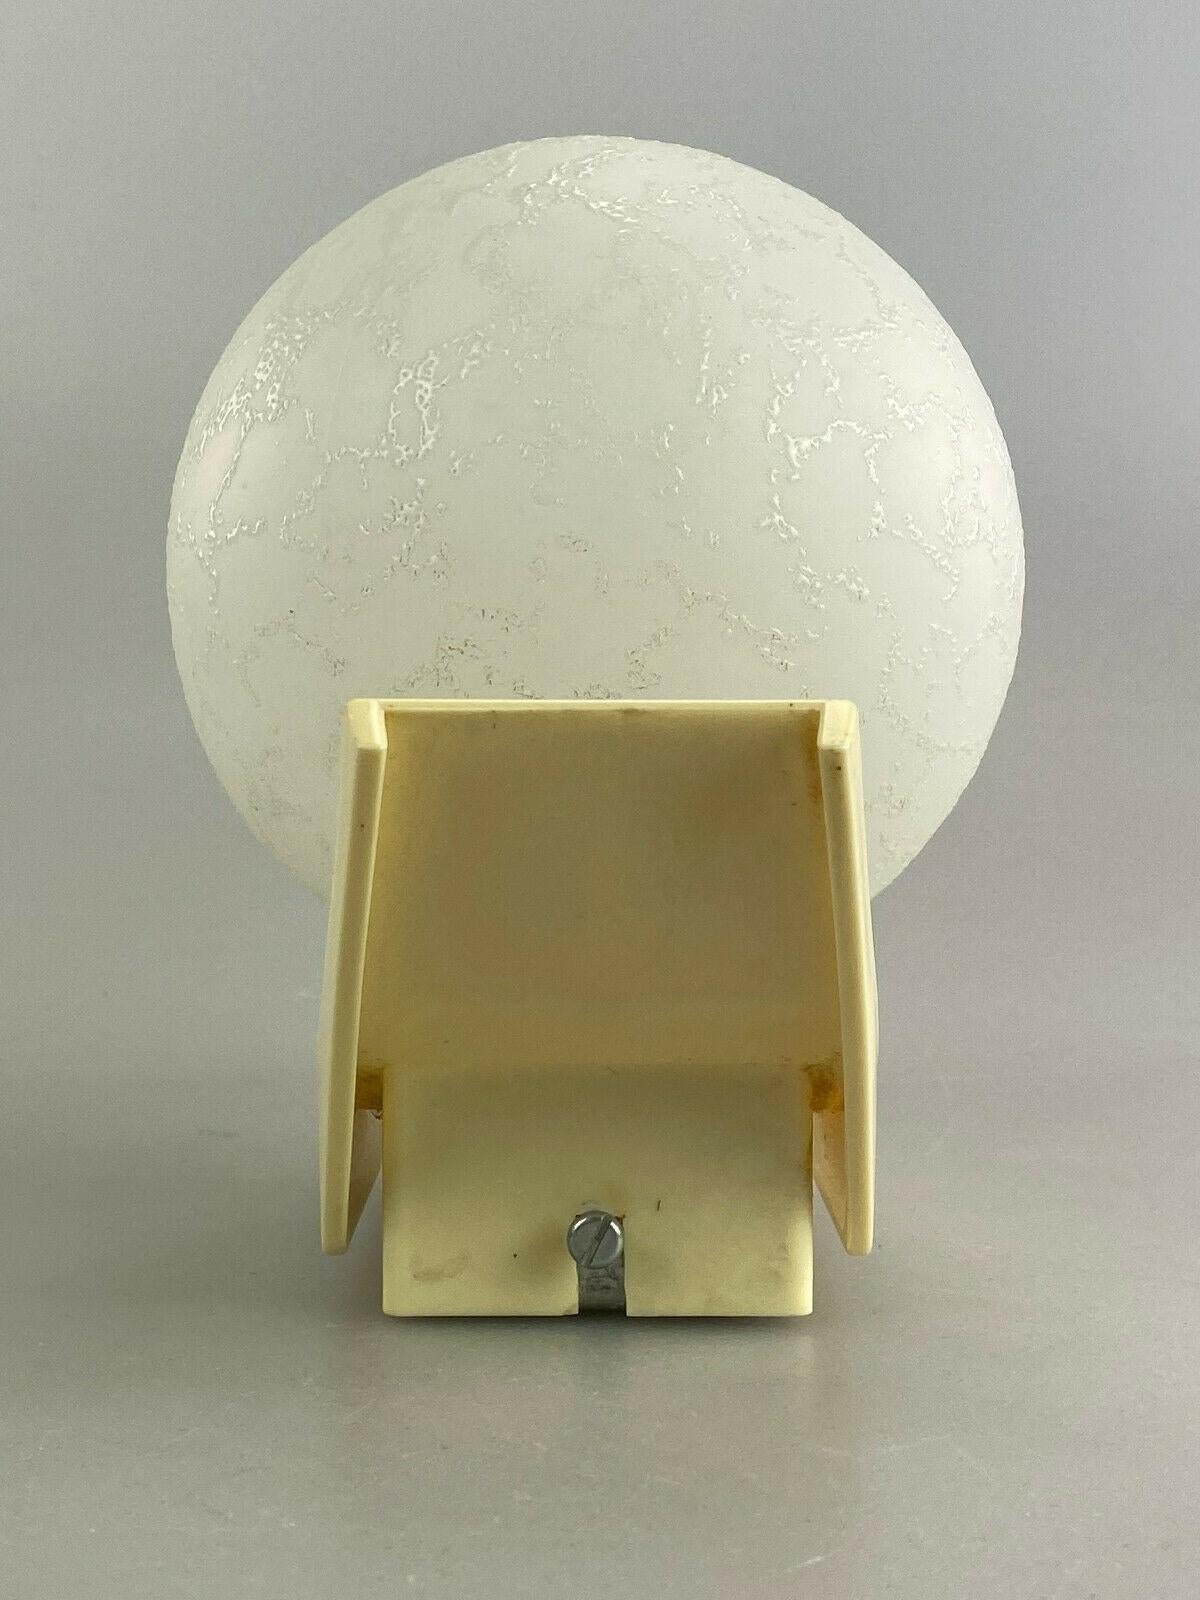 60s 70s Wall Lamp Ball Lamp Lamp Light Space Age Design For Sale 2